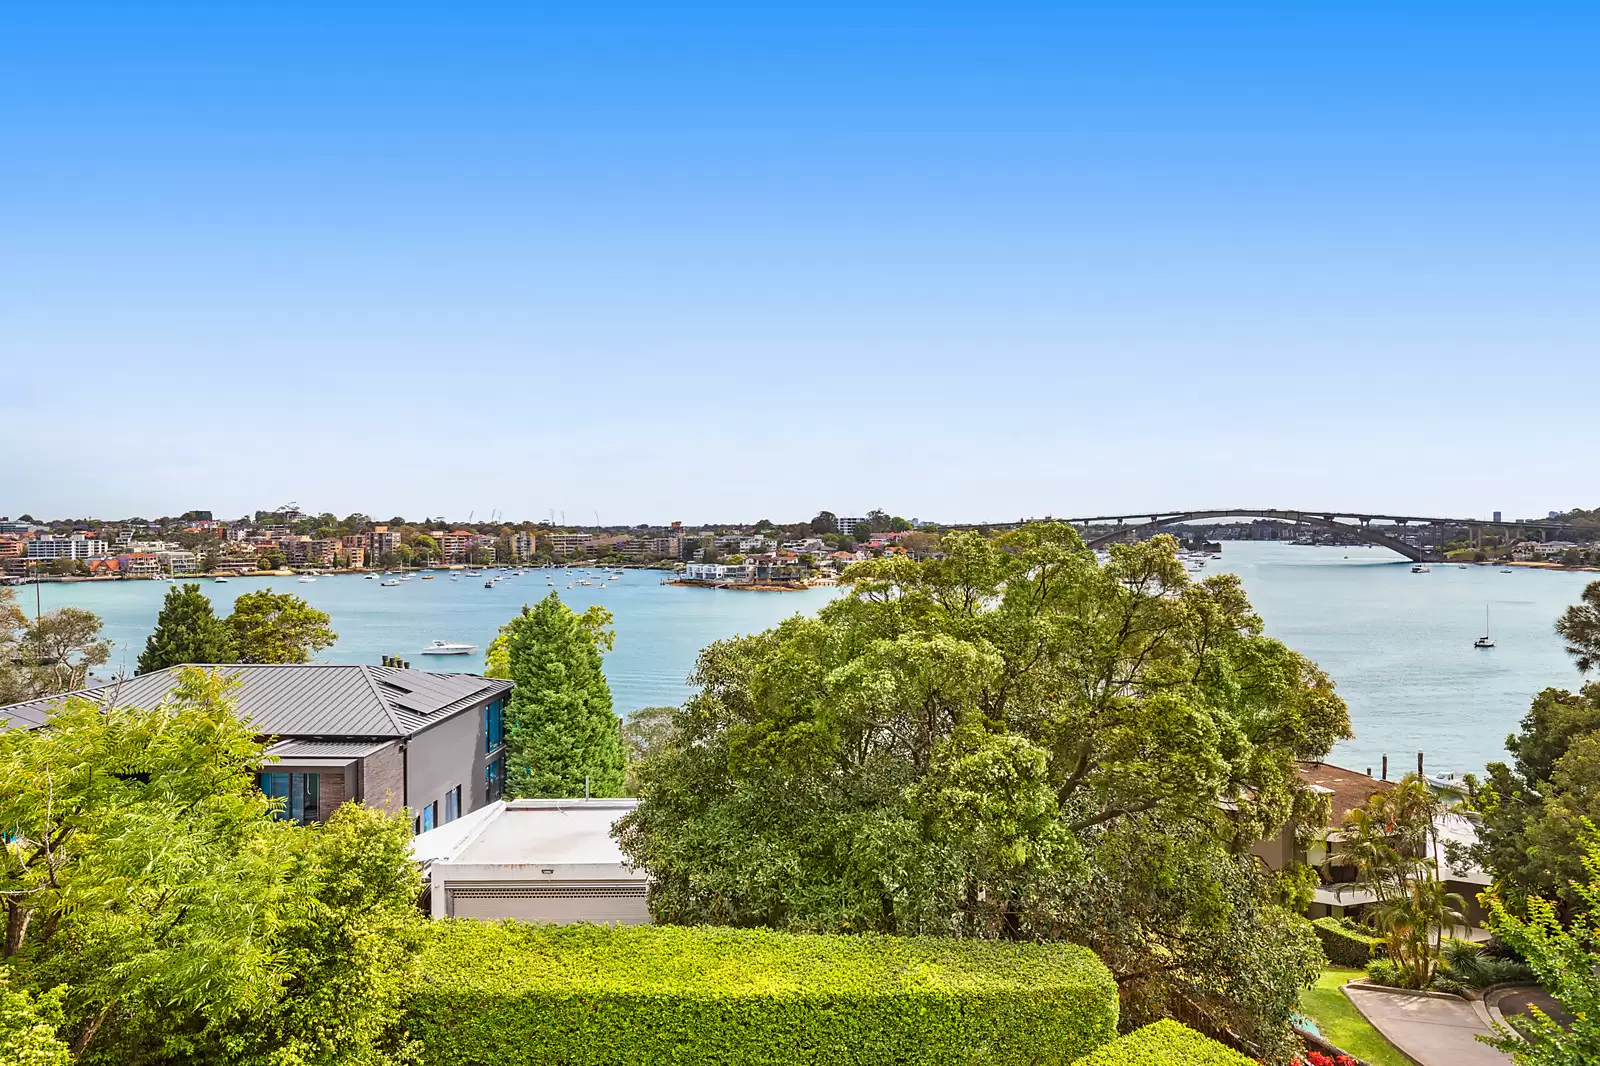 Photo #4: 1 Wybalena Road, Hunters Hill - Auction by Sydney Sotheby's International Realty